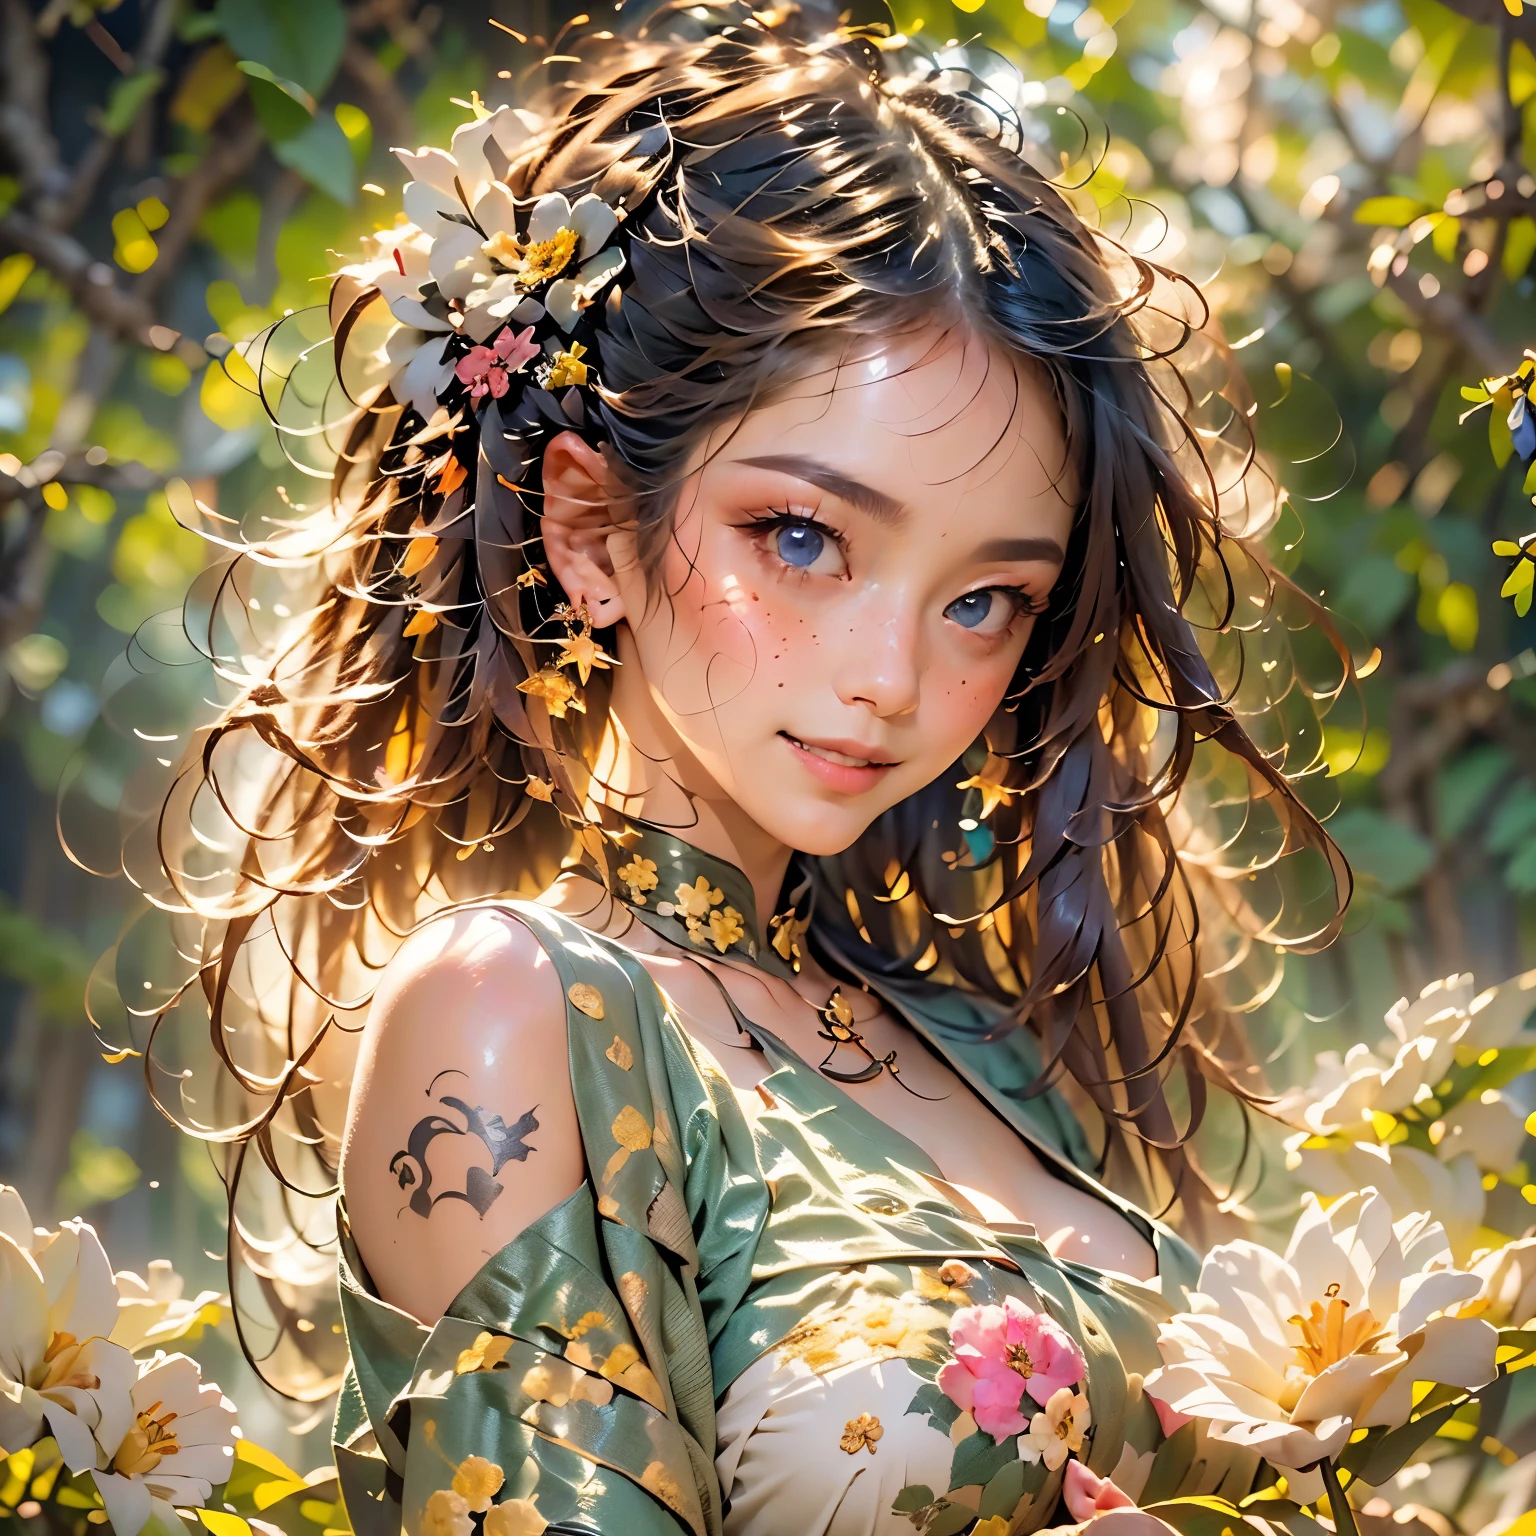 ((best quality, detailed background, girl, flower, starry sky)). ((Best quality, ultra detail, realism: 1.37), (1 girl - solo, full-length, waist-high, free - relaxed pose, standing), (girl, flower, garden, Starry sky,) (fashionable pink dress, open shoulders, neckline, wide short bell, decorated with modern flowers)). ((Beautiful eyes, luscious lips, detailed facial features, gorgeous smile), (piercing seductive gaze, freckles, jewelry, wild and rebellious look, soft and charming lips, shiny lips), (bewitching gaze, bright eyes), (playful expression faces, natural beauty)). (Studio Lighting), (Orange, Pink, White, and Green Details), (Tattoos), (Technological Clothing: 1.1), (Abstract Background with Lines and Circles). ((Best Quality: 1.37). ((Settings, soft light, shadows) (tech background - abstraction) (HD detail, cinematic, surrealism), (Soft light, Deep focus, ray tracing, Diffusion). (Settings, soft light, shadows). - abstraction).